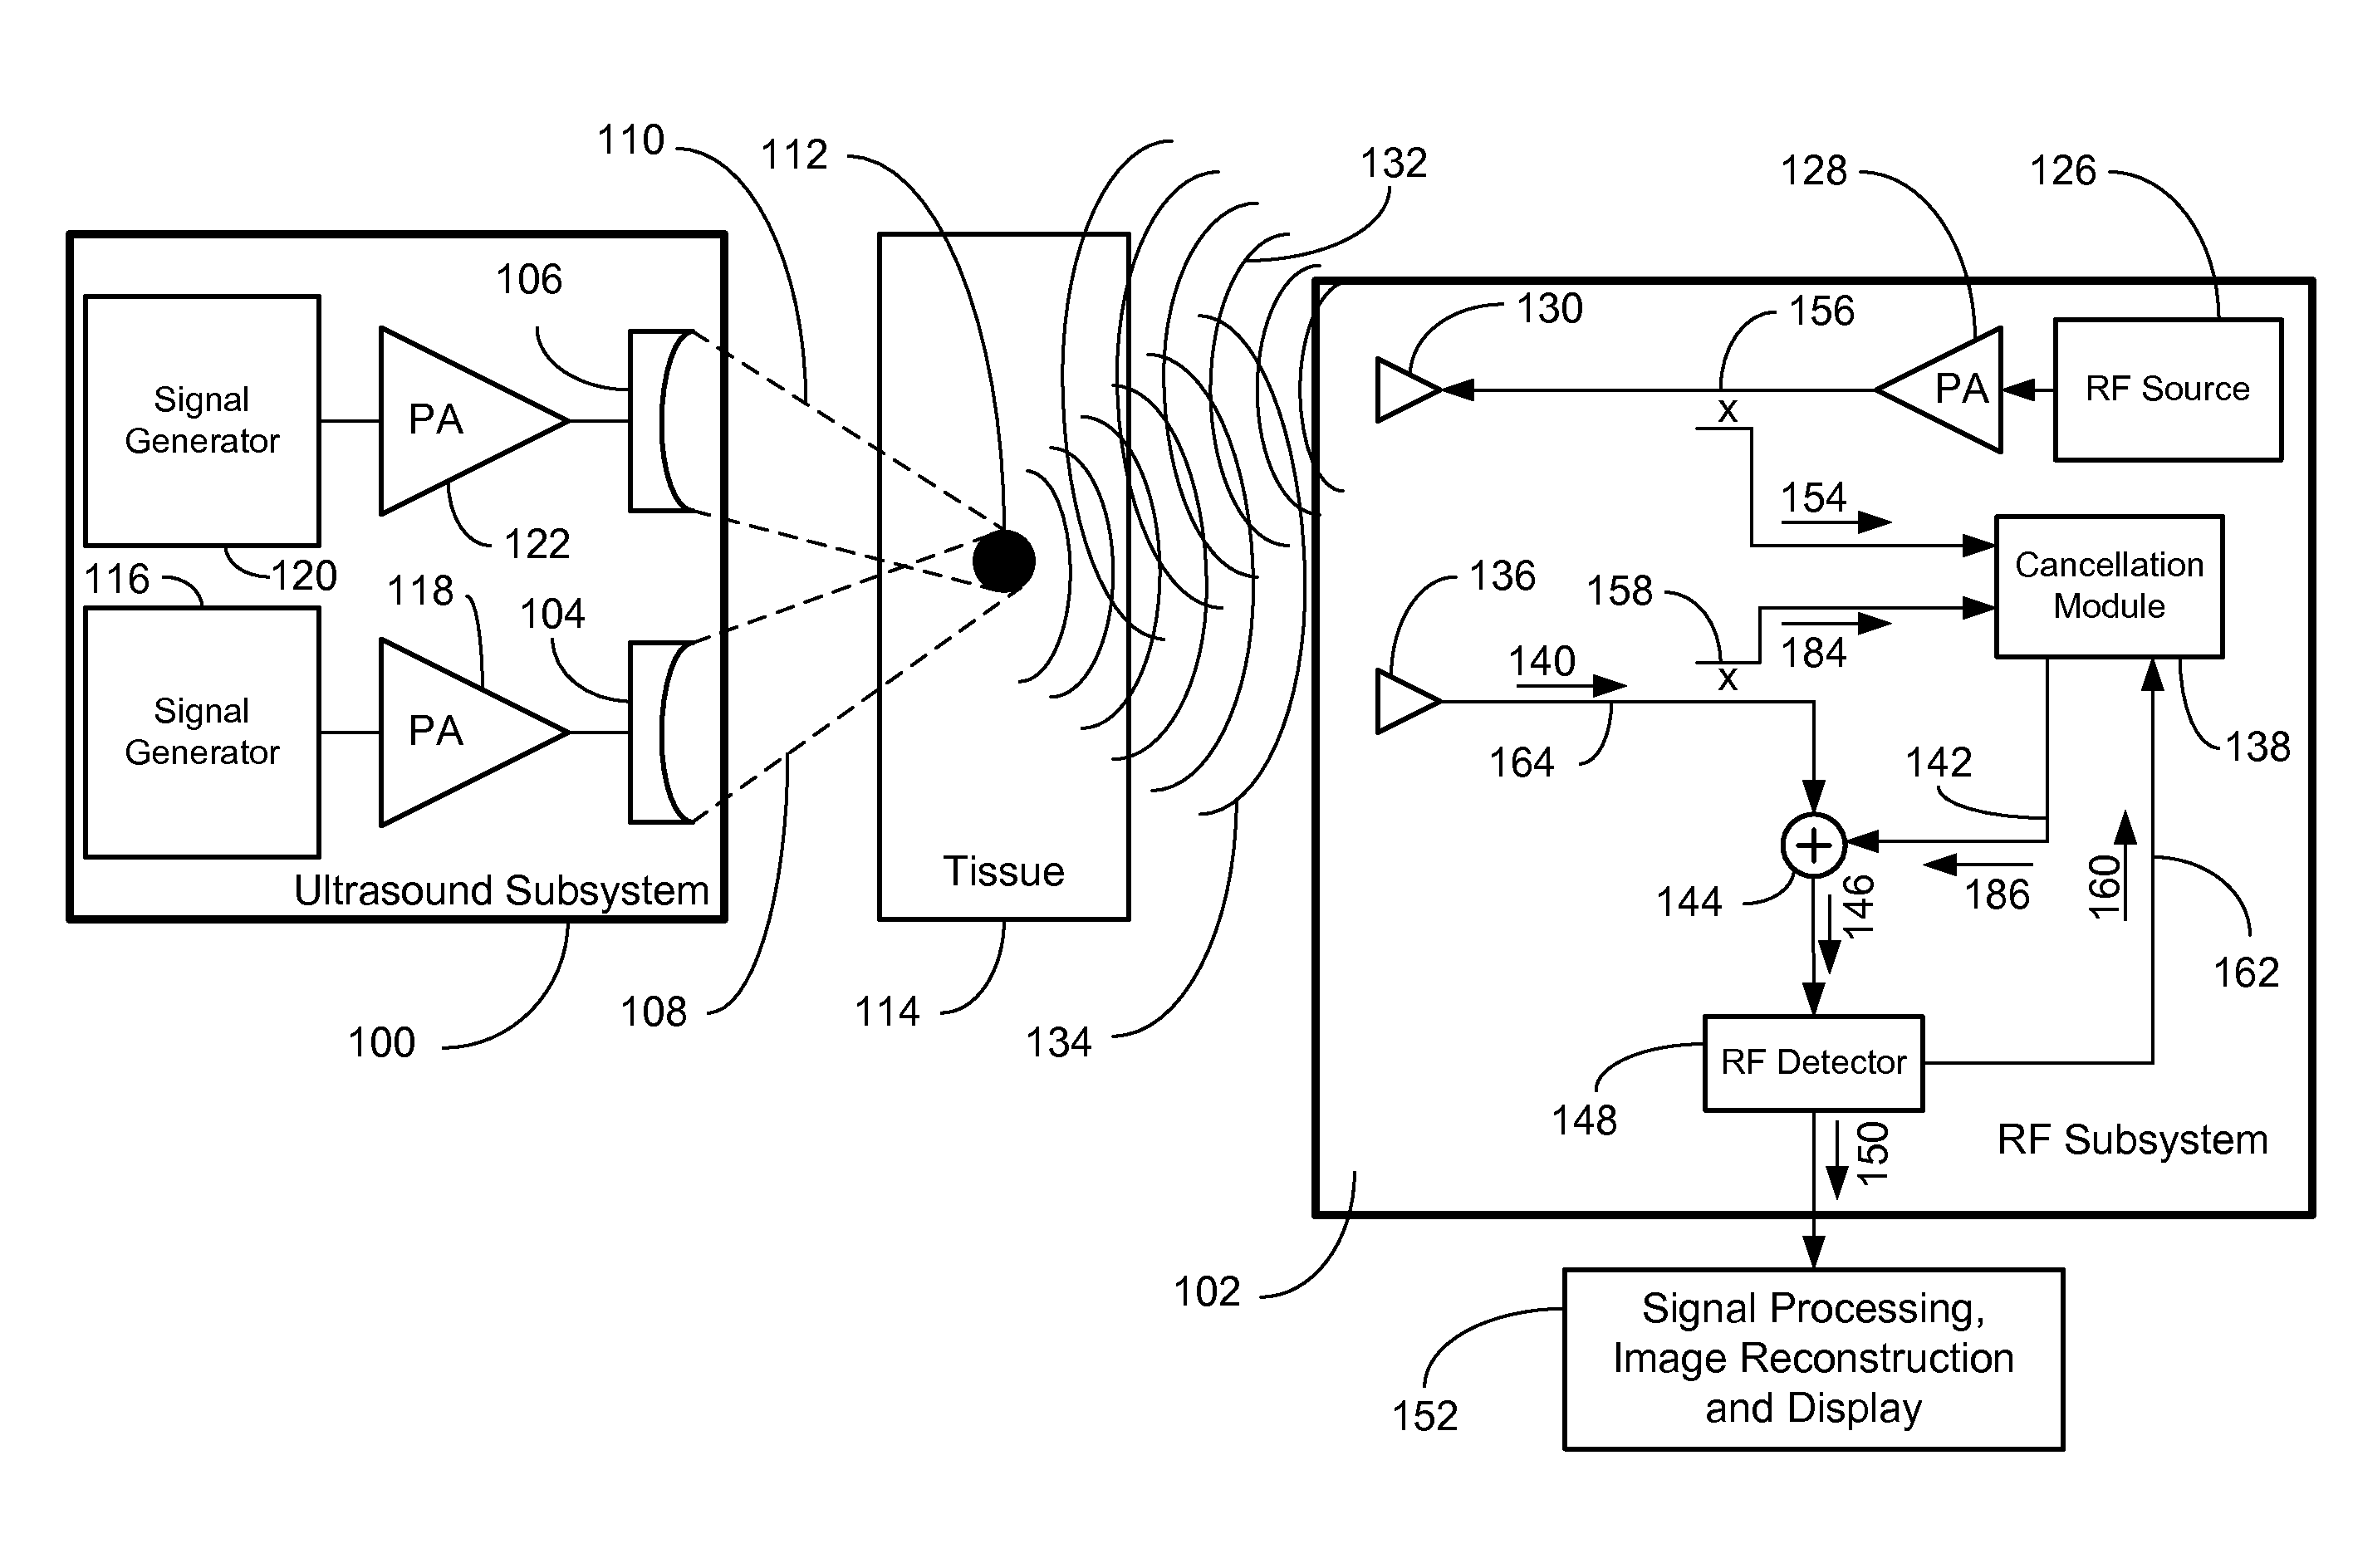 Multi-Modality Ultrasound and Radio Frequency System for Imaging Tissue